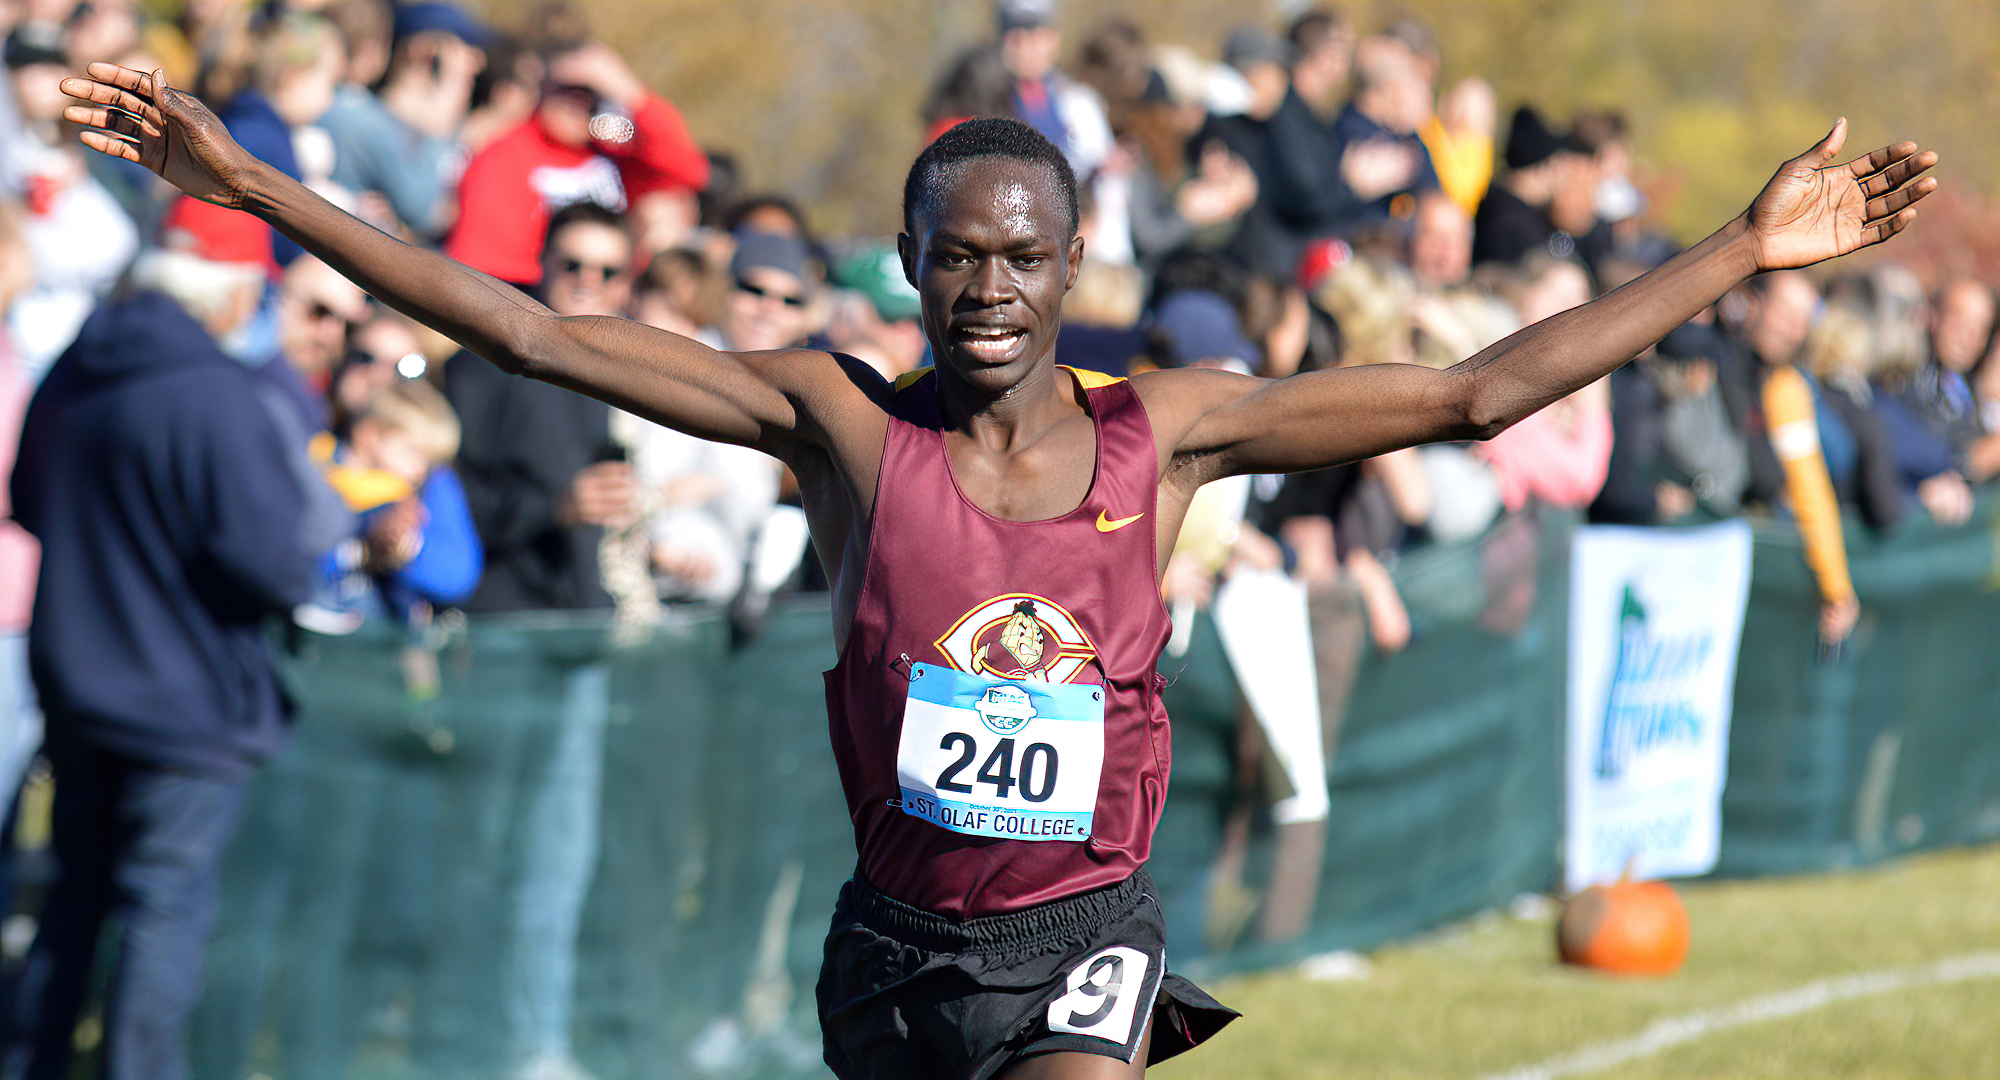 Senior Munir Isahak ran away from the competition at the MIAC Meet and became the first CC athlete to win the individual championship since 1991. (Photo courtesy of BJ Pickard - MIAC Office)